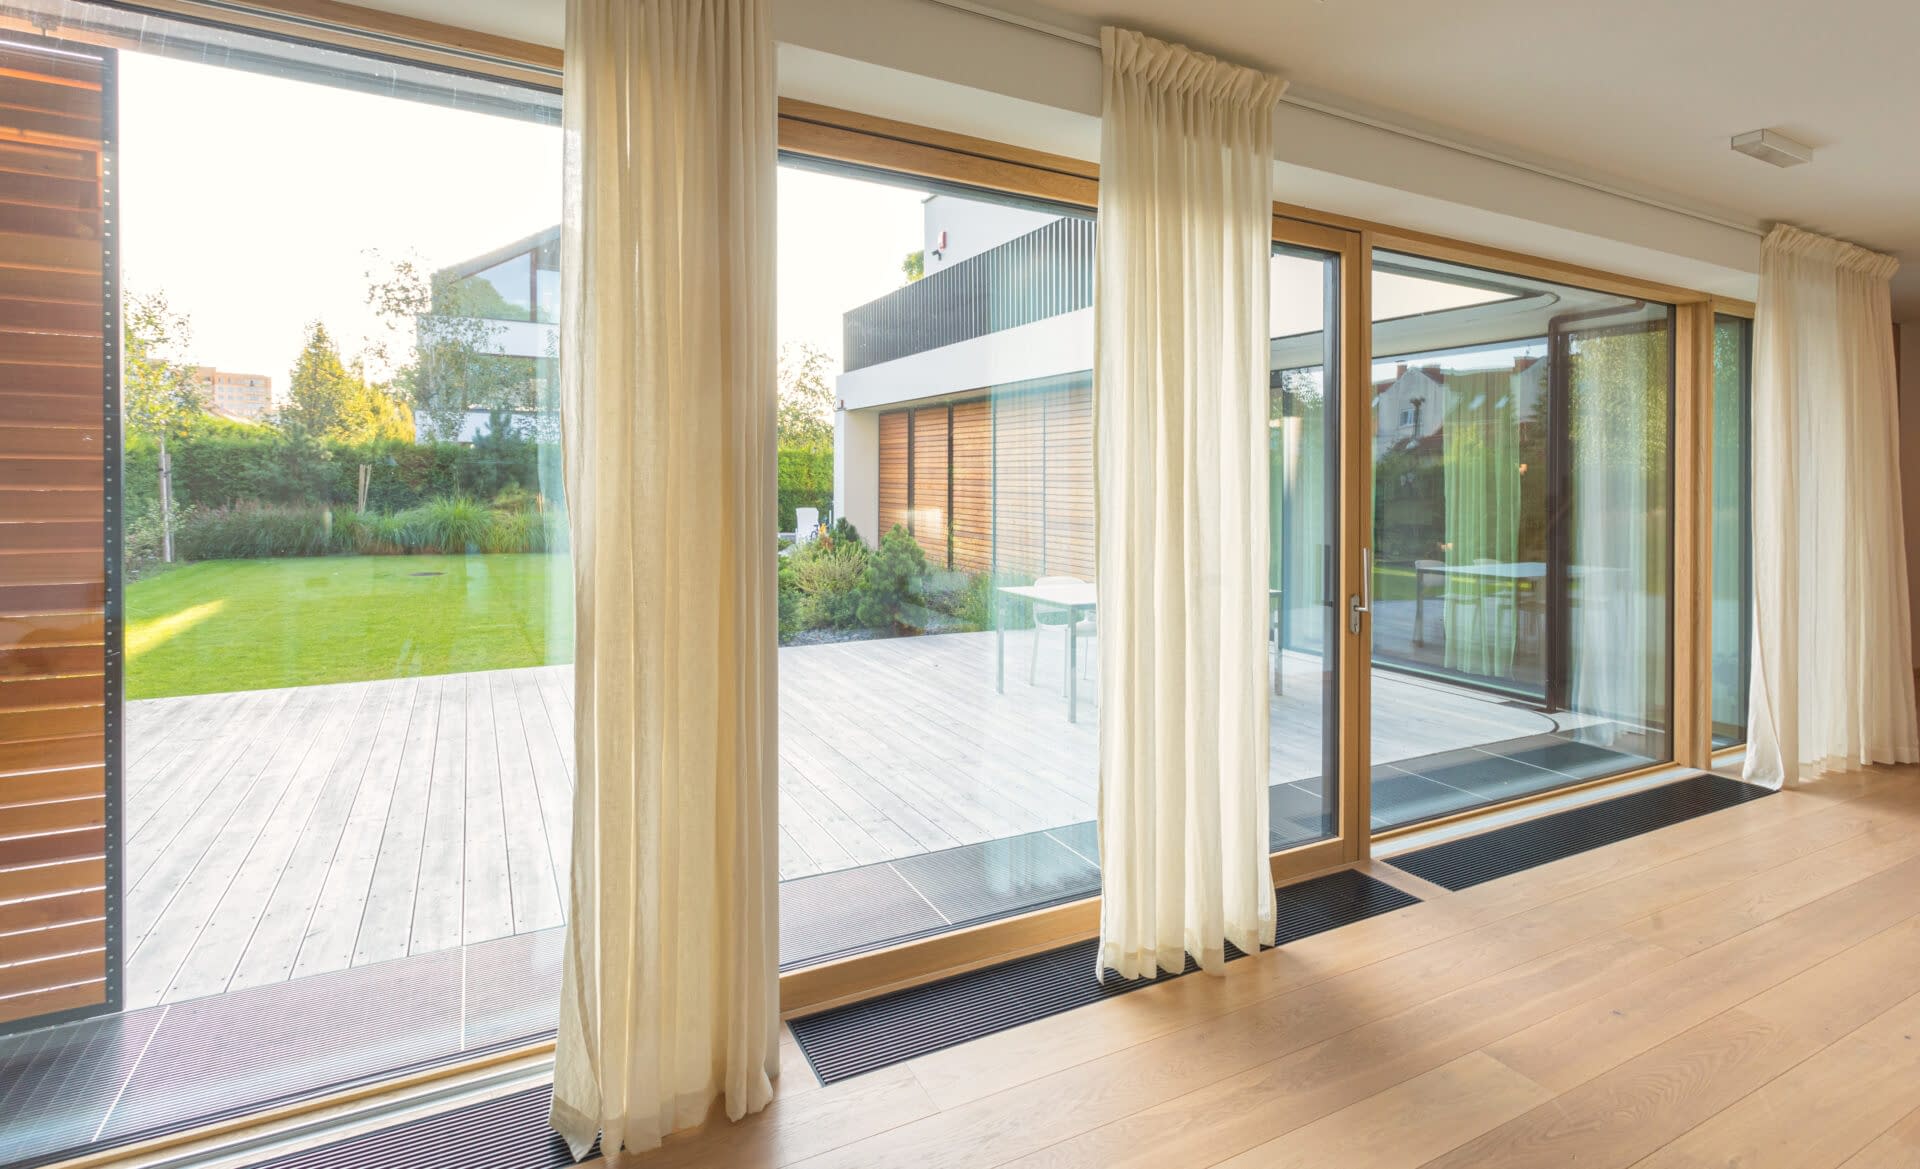 total glass expansive door system